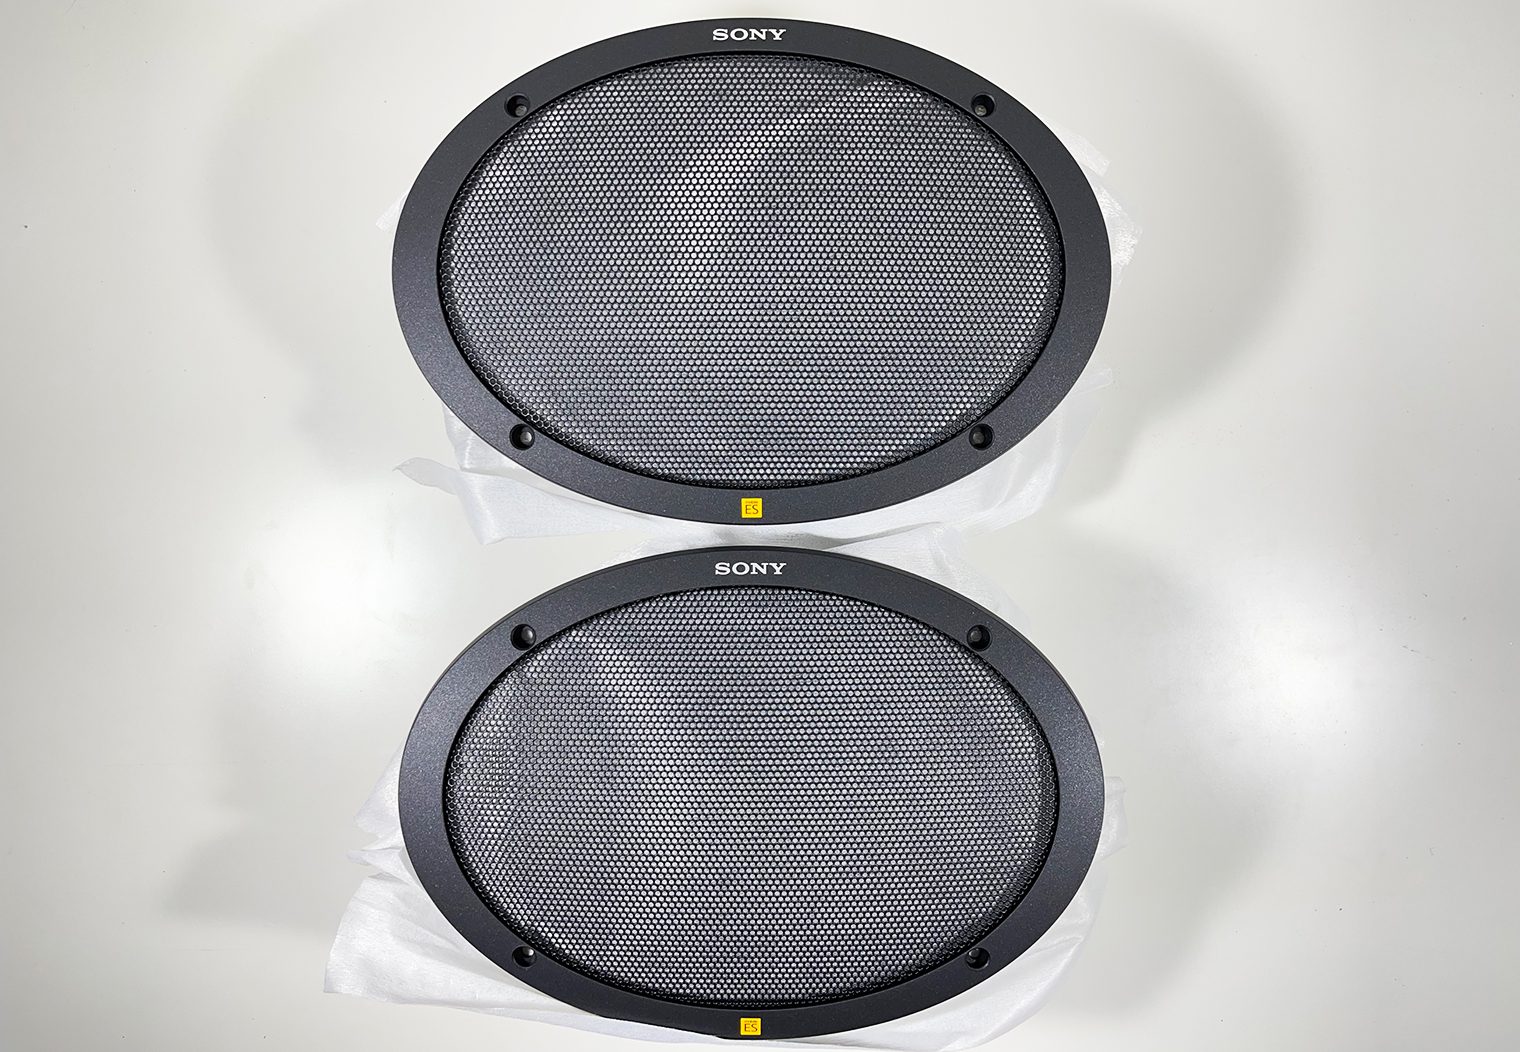 Sony XS-692ES grilles with cloth in between